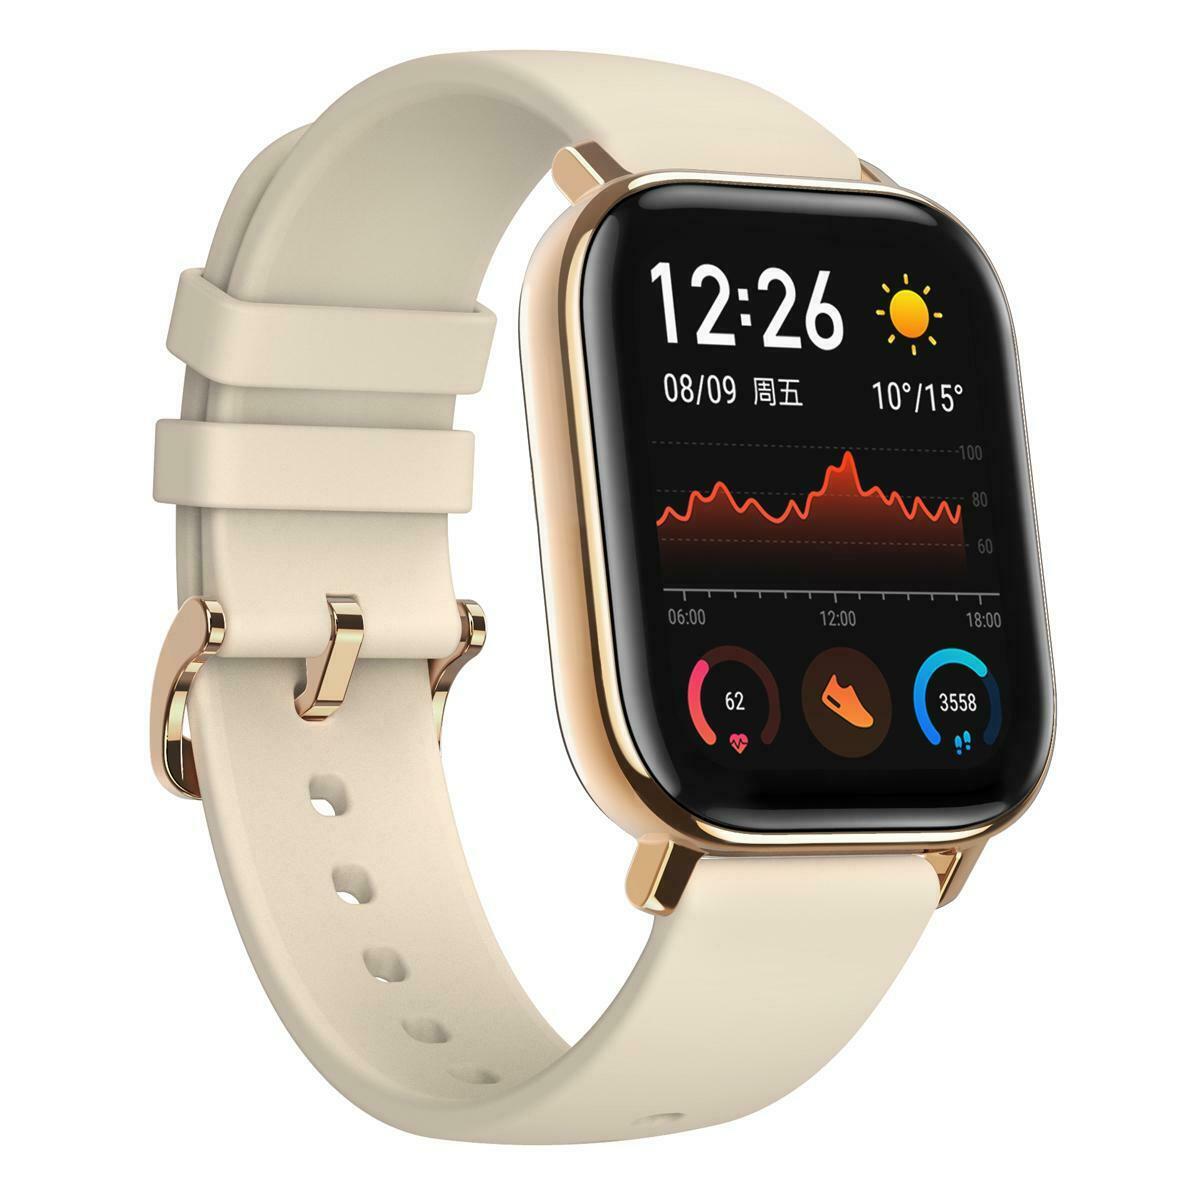 S L1600 5 Xiaomi &Lt;Div Id=&Quot;Product-Description-Short-889&Quot; Class=&Quot;Product-Description-Short&Quot;&Gt; &Lt;Strong&Gt;Xiaomi Amazfit Gts&Lt;/Strong&Gt; - Smartwatch Combining Elegance And Sport, Amoled Display, Extreme Endurance Of Up To 46 Days, Bluetooth, Gps, Biotracker For Heart Rate Measurement, 12 Supported Sports Activities, Aluminium Body And Much More... Gold Color. &Lt;/Div&Gt; &Lt;Div Class=&Quot;Product-Actions&Quot;&Gt;&Lt;Form Id=&Quot;Add-To-Cart-Or-Refresh&Quot; Action=&Quot;Https://Xiaomi-Store.cz/En/Cart&Quot; Method=&Quot;Post&Quot;&Gt; &Lt;Div Class=&Quot;Product-Variants&Quot;&Gt;&Lt;/Div&Gt; &Lt;Div Class=&Quot;Product-Prices&Quot;&Gt; &Lt;Div Class=&Quot;Product-Price H5 &Quot;&Gt;&Lt;/Div&Gt; &Lt;/Div&Gt; &Lt;/Form&Gt;&Lt;/Div&Gt; Xiaomi Xiaomi Amazfit Gts - Desert Gold